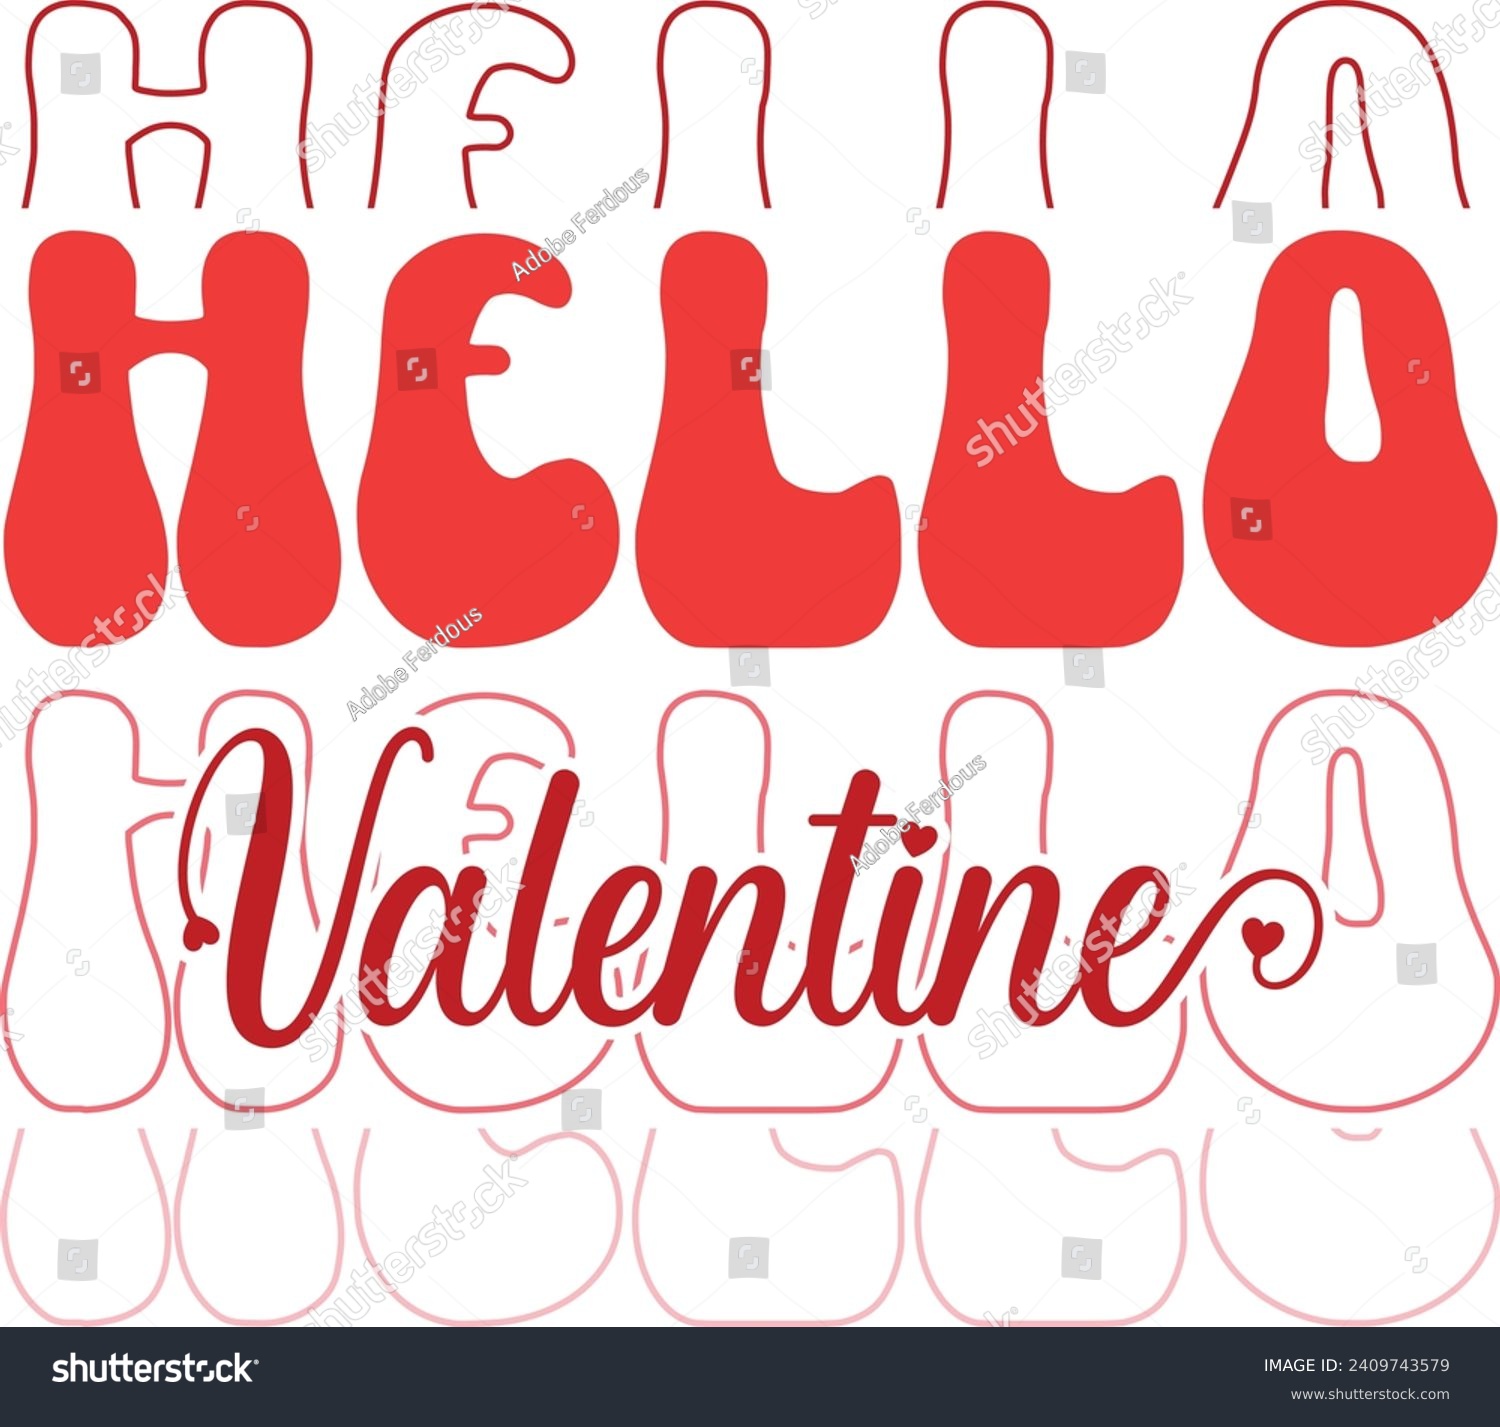 SVG of Hello Valentine - Calligraphy phrase for Valentine's day. Hand drawn lettering for Lovely greetings cards, invitations. Good for Romantic clothes, t- shirt design svg